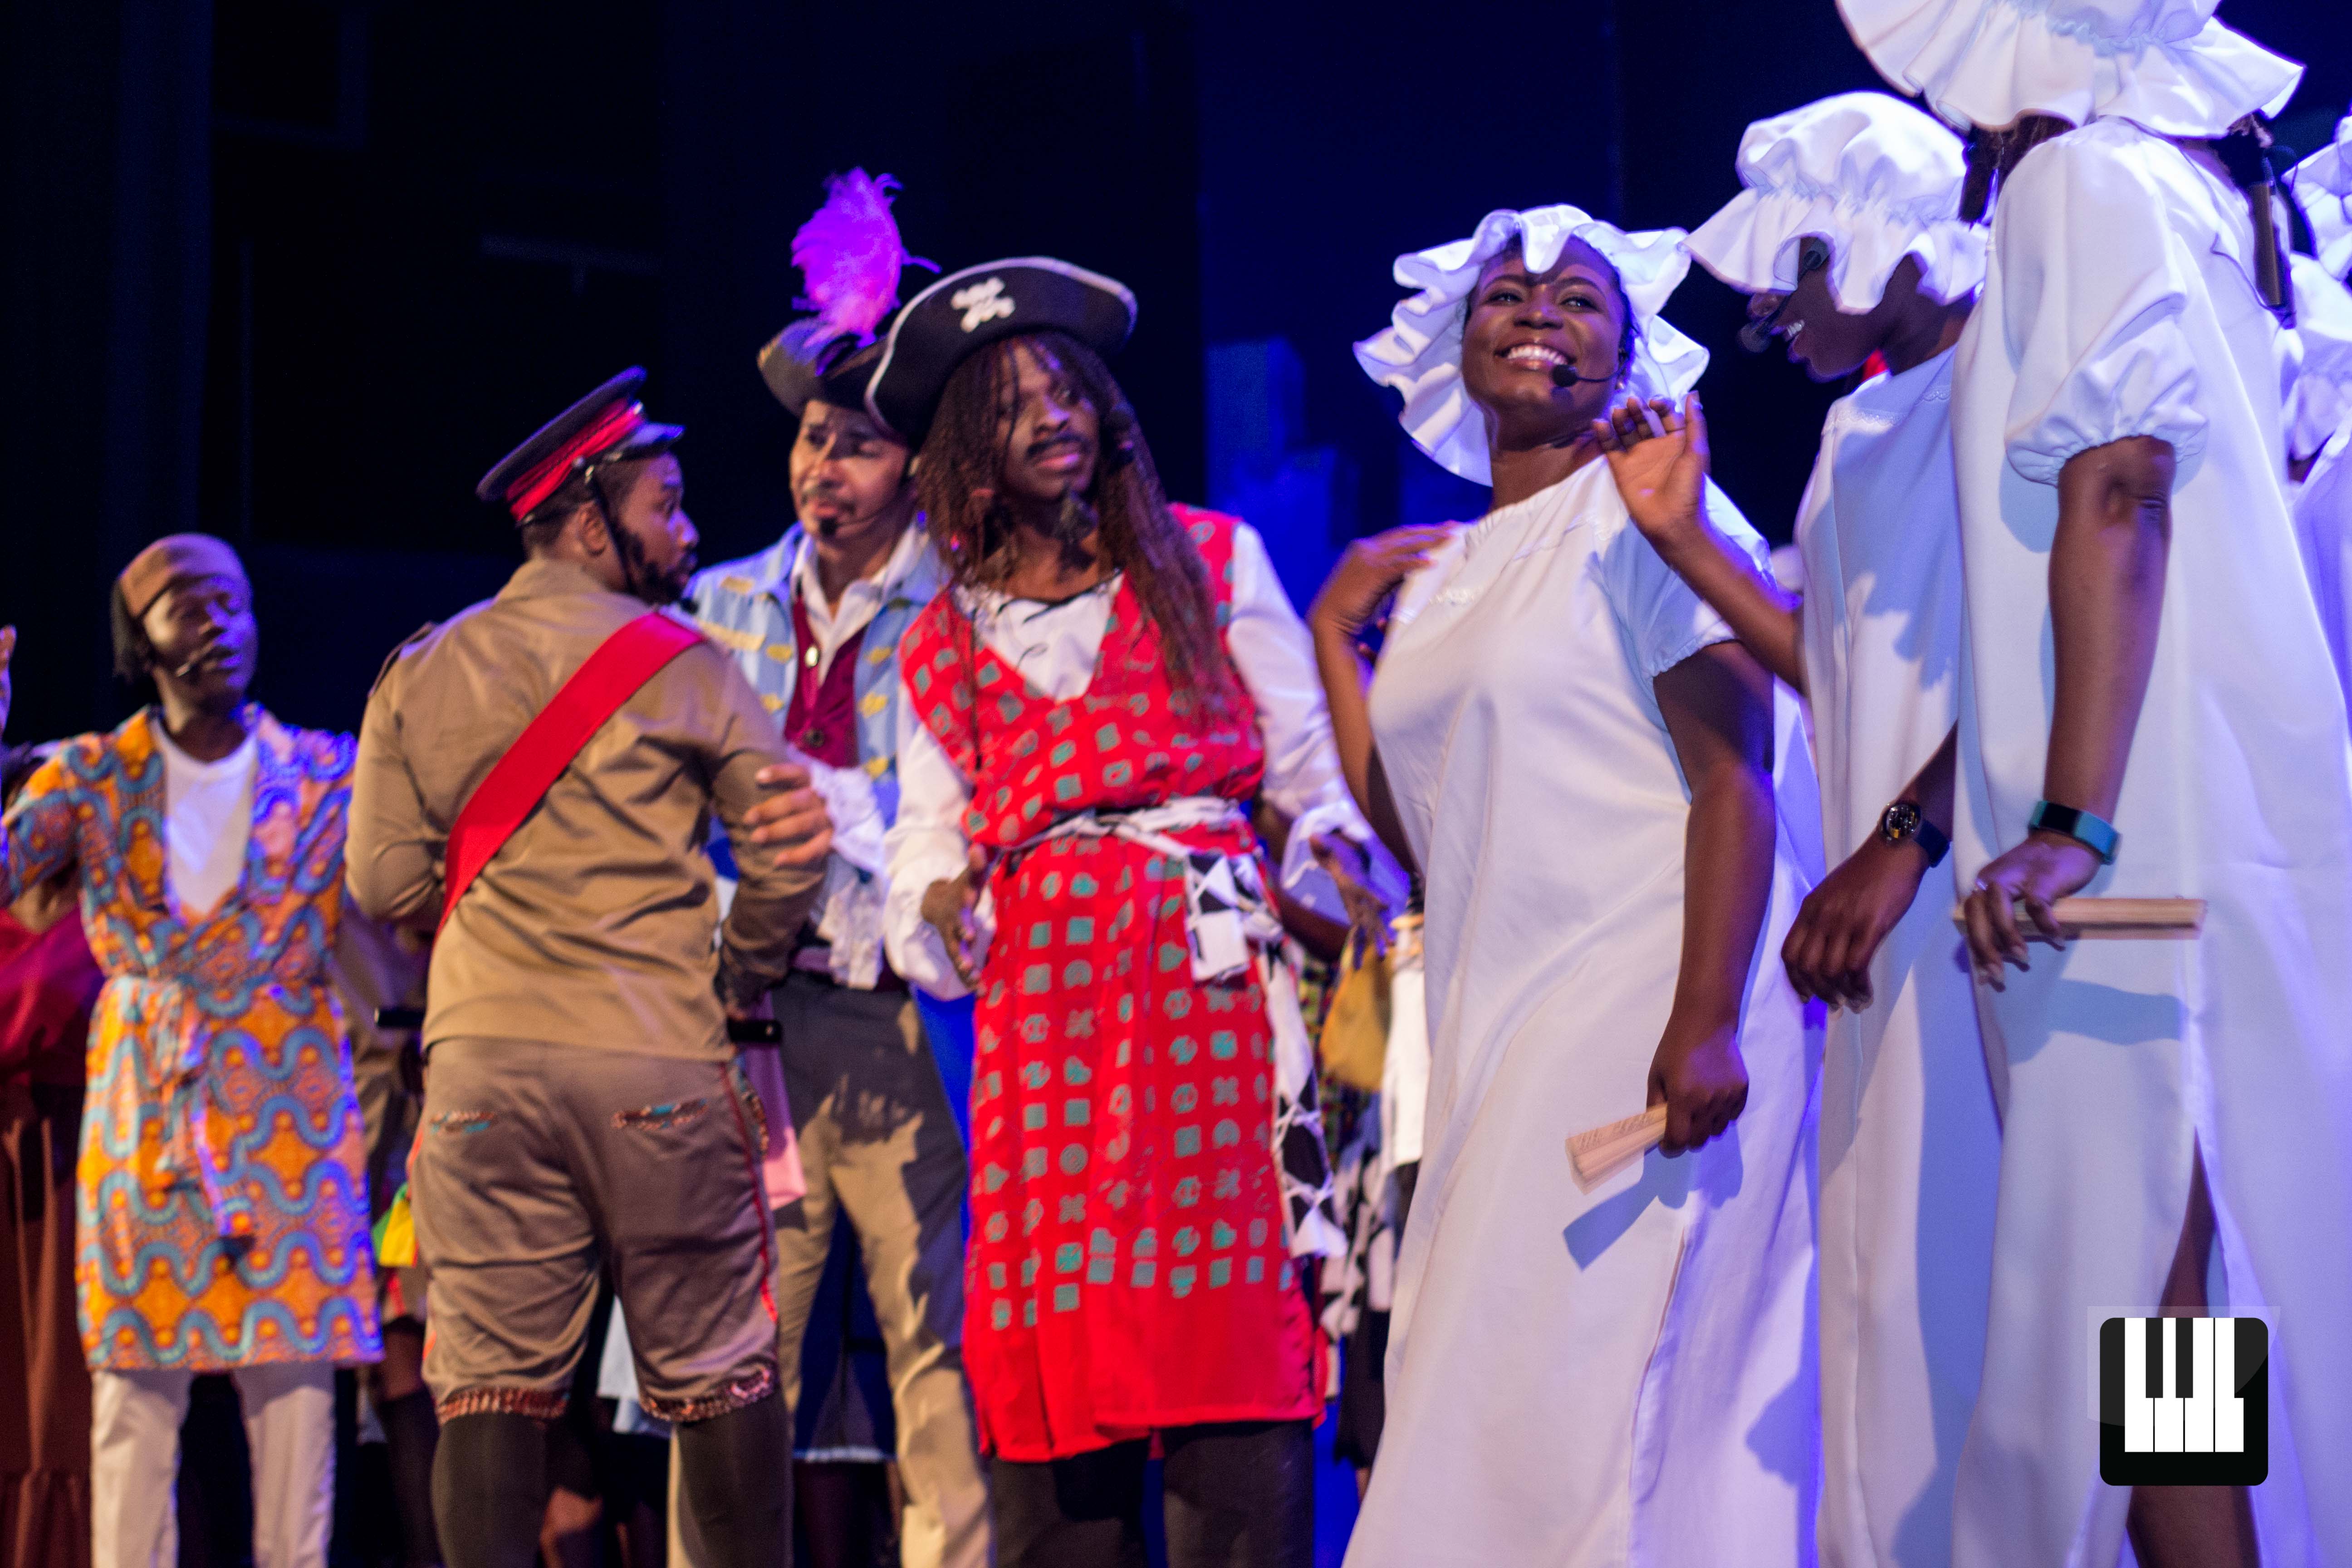 The Pirates of Penzance Achimota School's alumni and current students staged a remarkable revival of Gilbert & Sullivan's The Pirates of Penzance at the National Theatre. Choral Music Ghana witnessed the entertaining production.